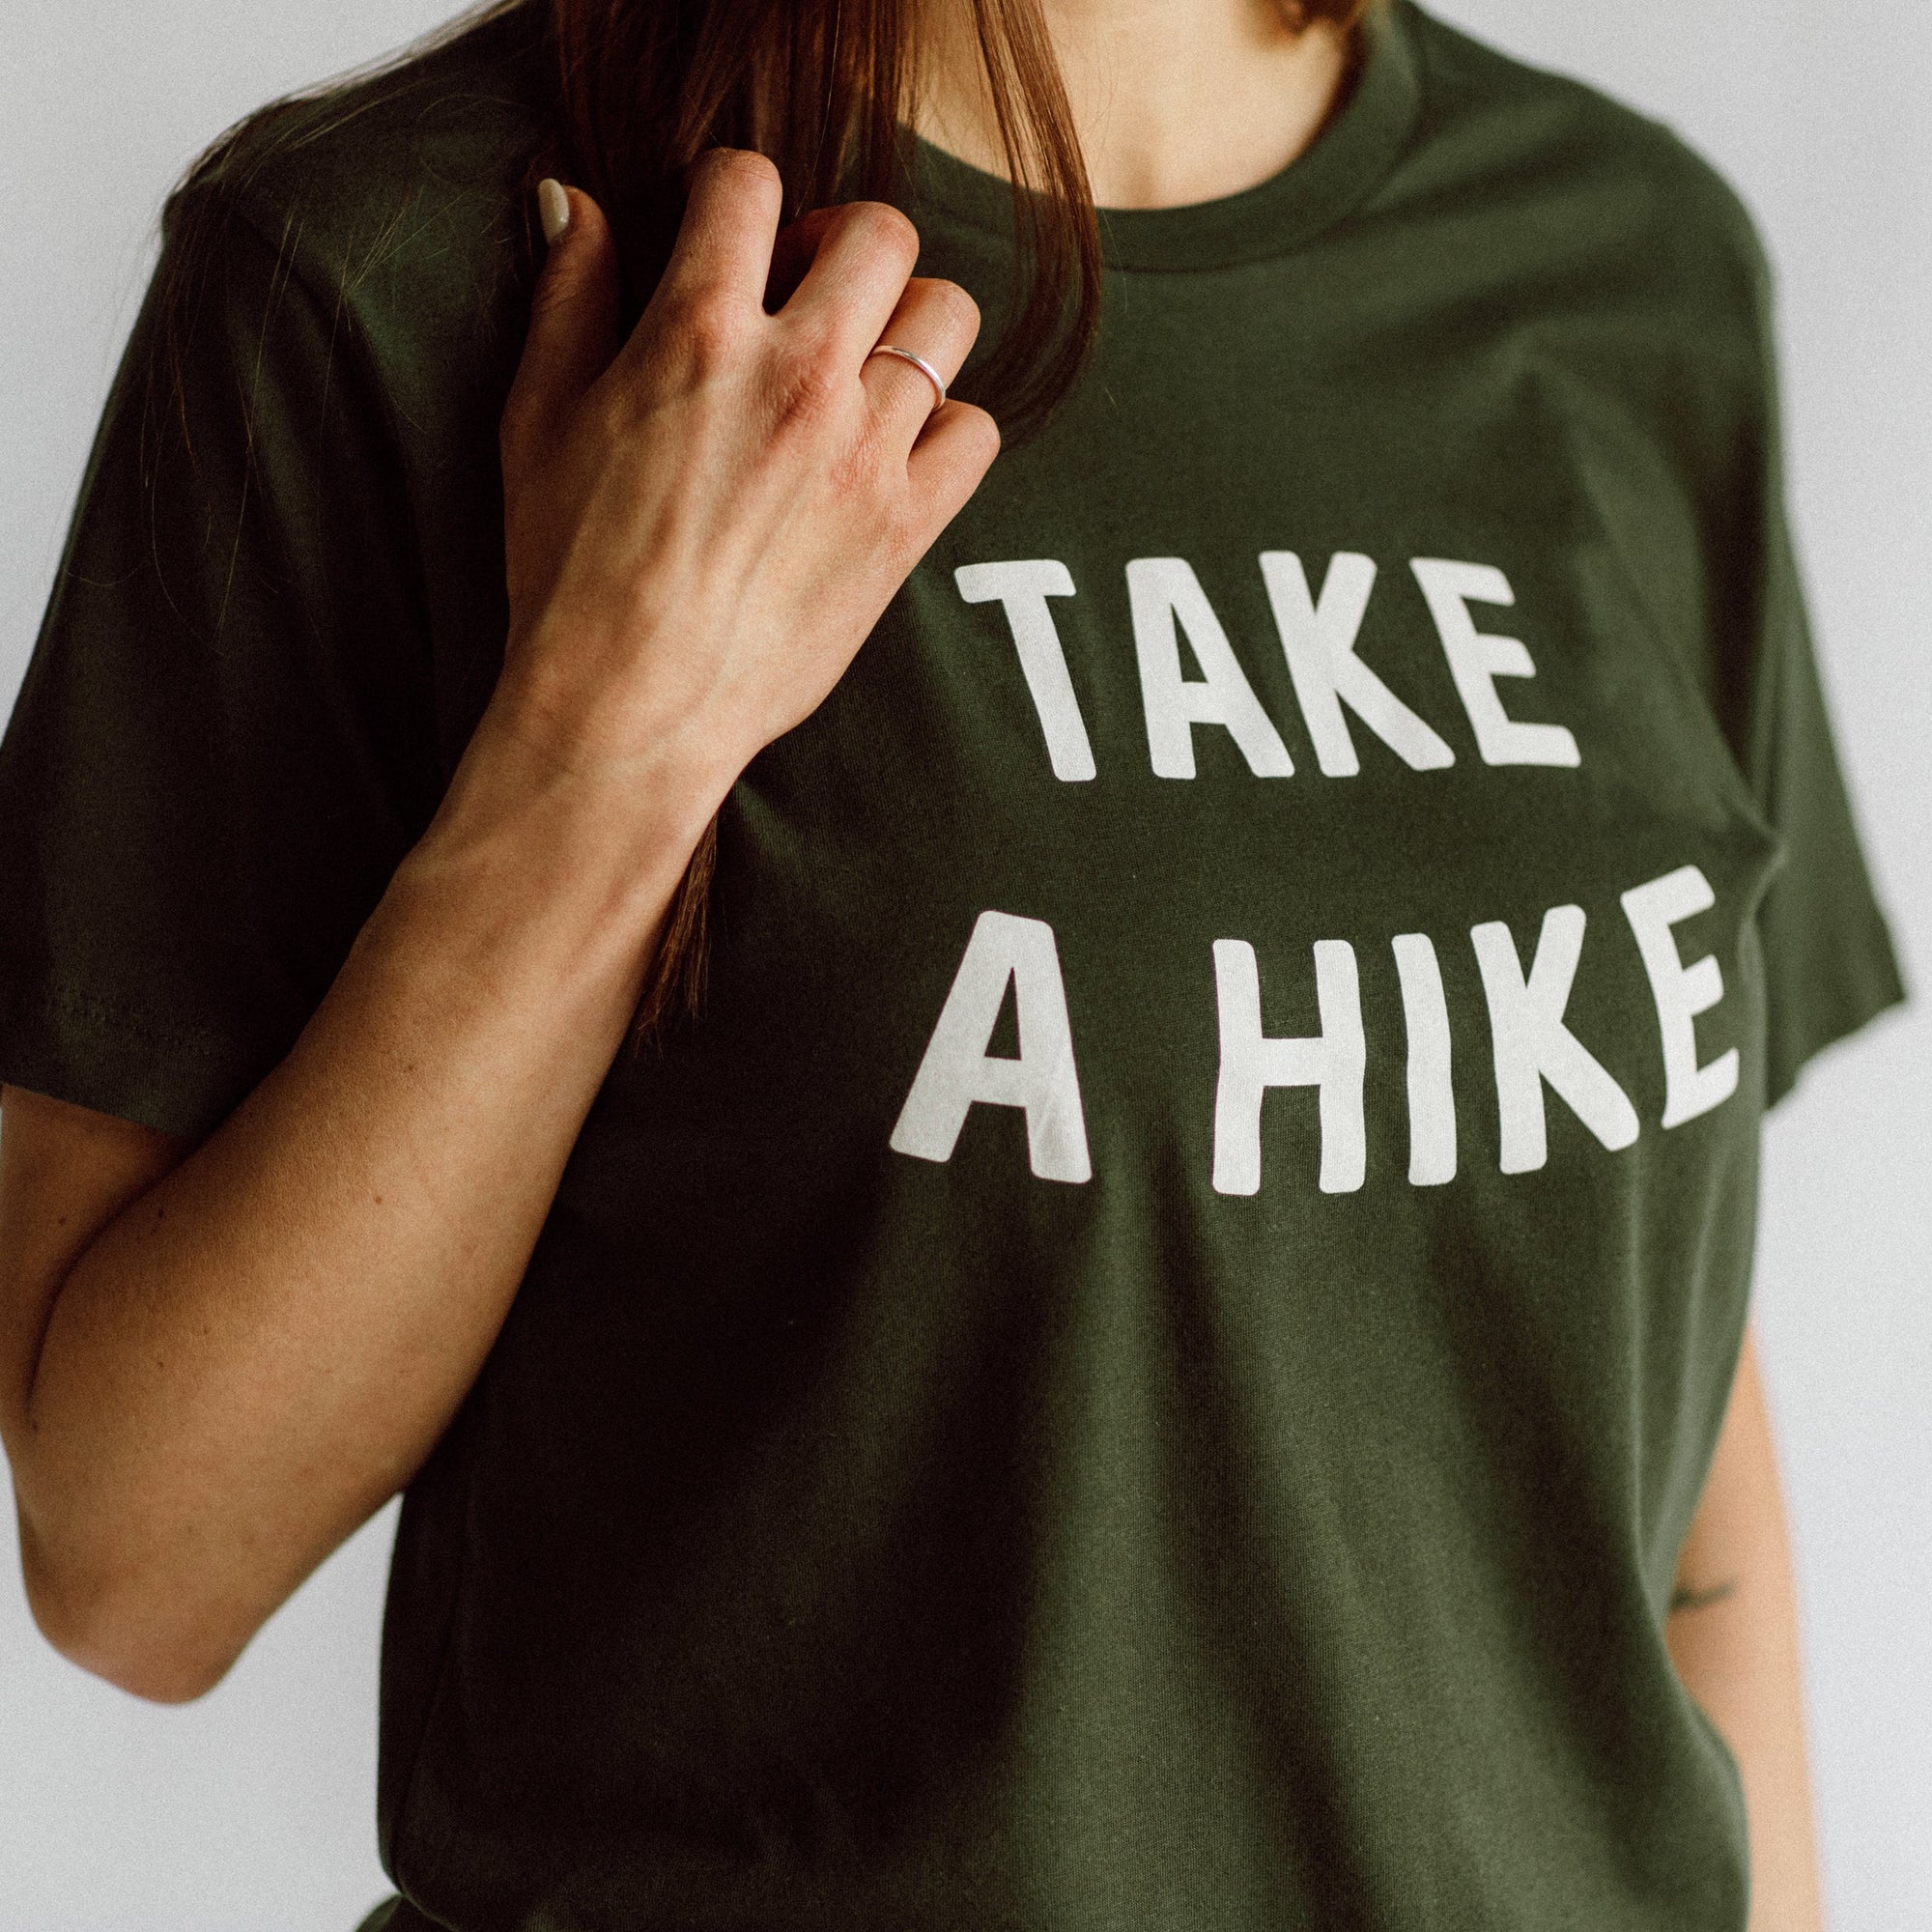 Take A Hike Unisex Tee womens August Ink 